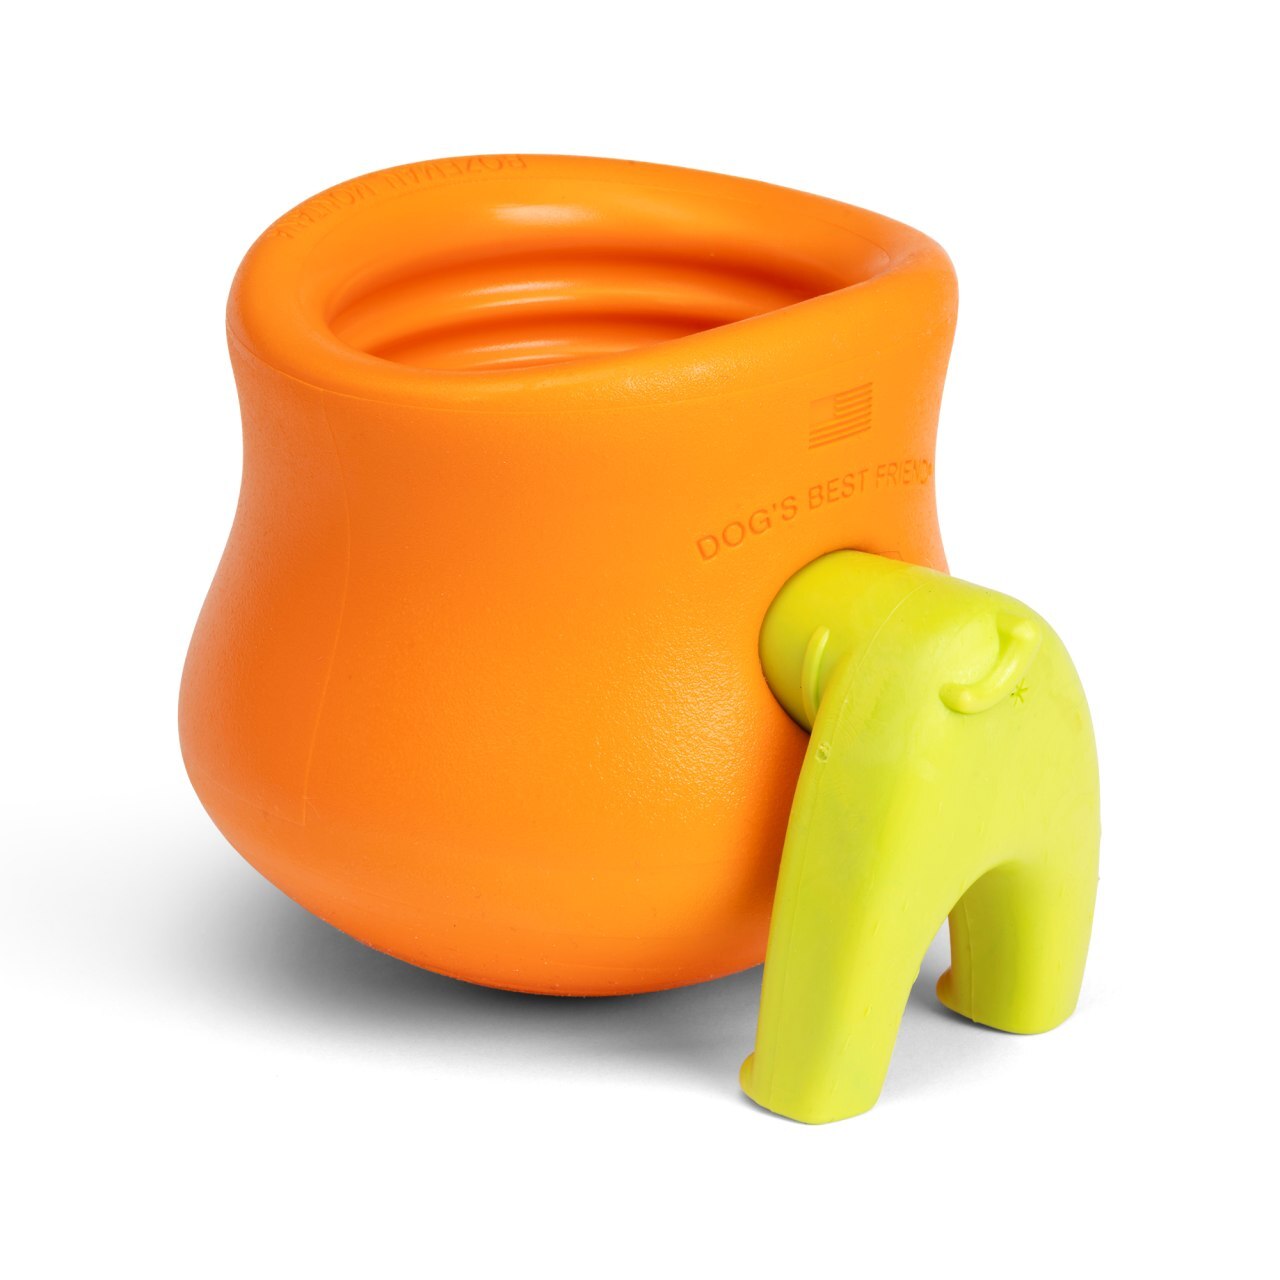 West Paw Toppl Stopper - Fill and Freeze your Toppl with Ease image 1